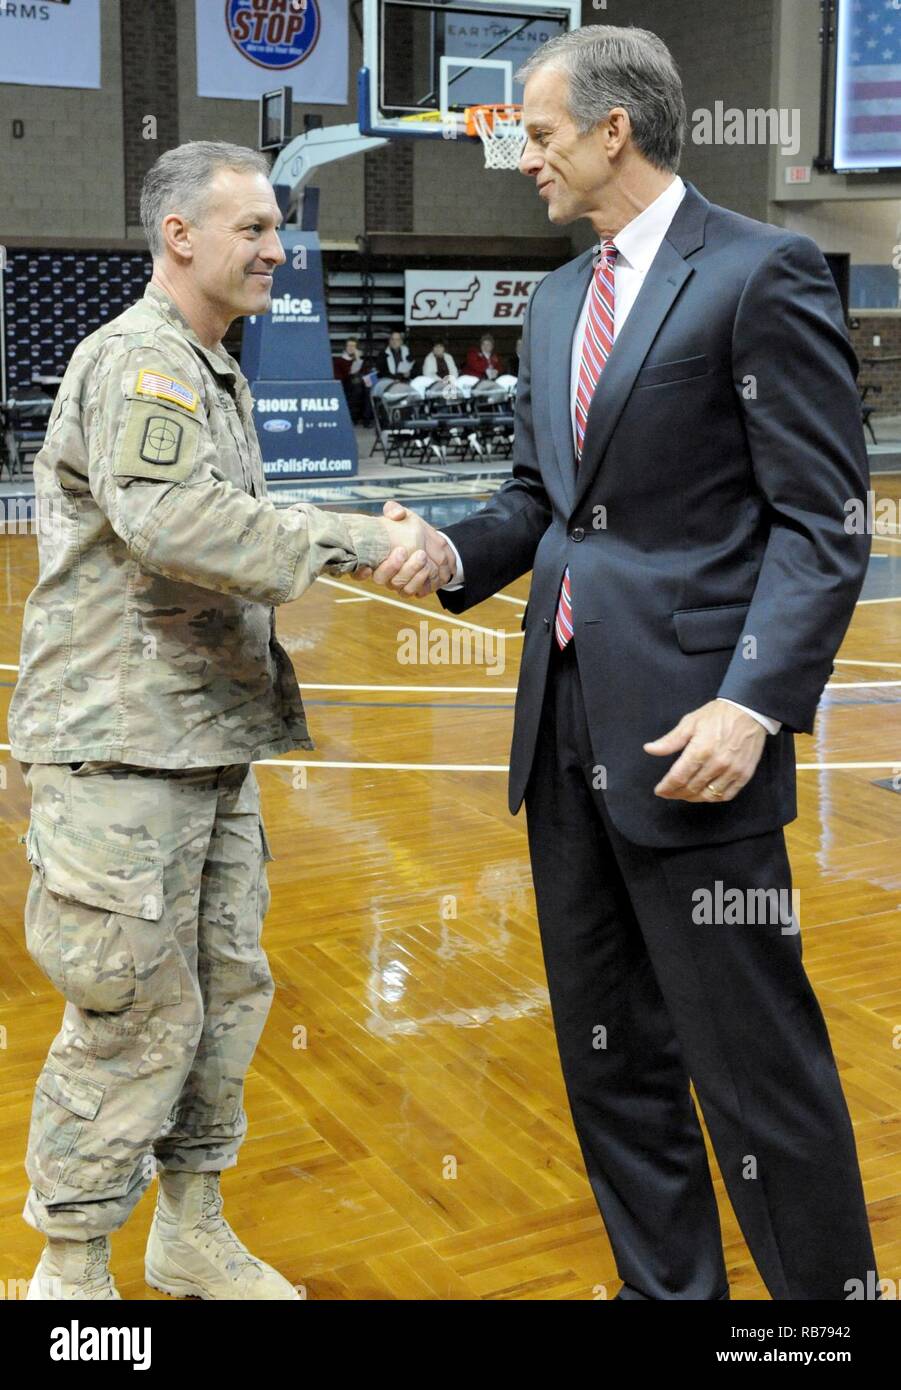 U.S. Senator John Thune welcomes home Maj. James Forbes, 196th Maneuver Enhancement Brigade, South Dakota Army National Guard, during a ceremony at the Sanford Pentagon in Sioux Falls, S.D., Dec. 14, 2016. The Sioux Falls-based unit returned from a 10-month deployment where the Soldiers conducted security and force protection operations at several bases in the country. Stock Photo